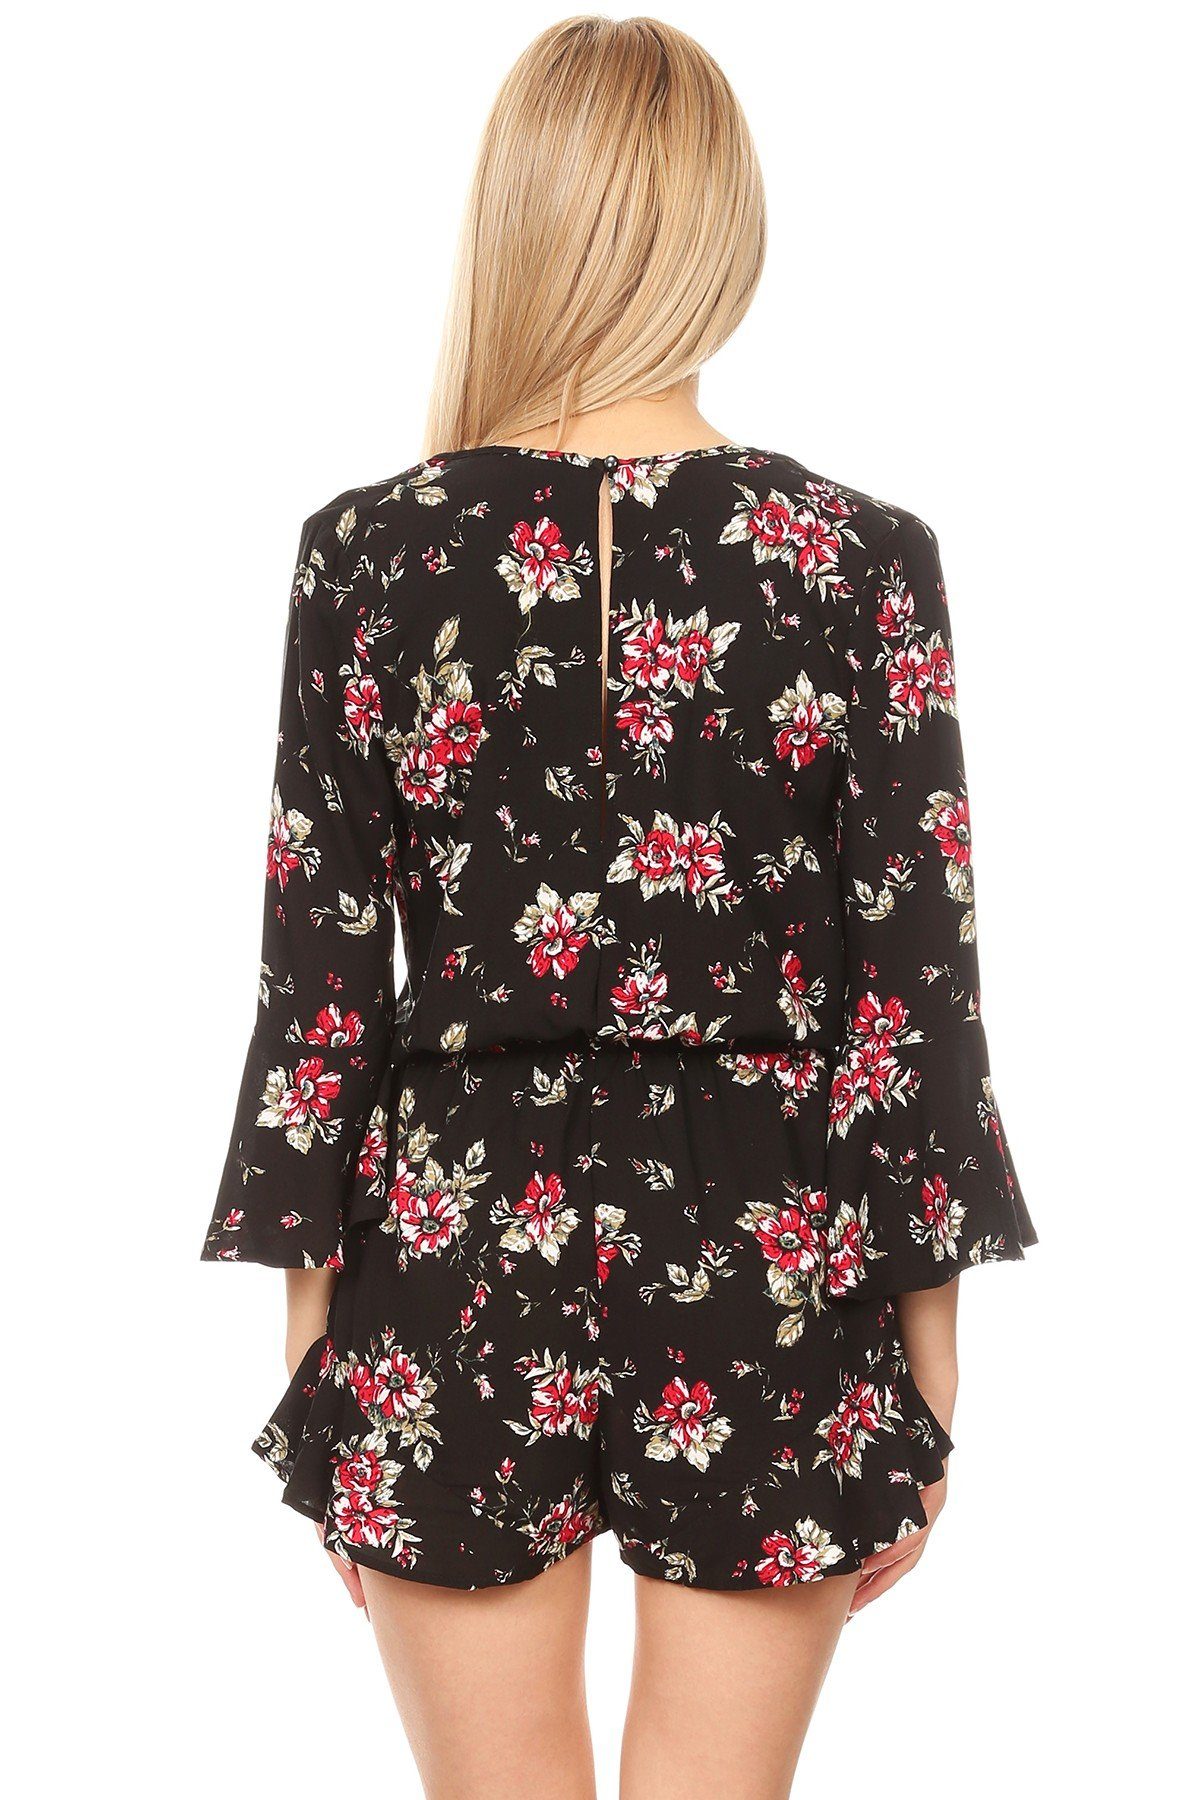 Women/Juniors 3/4 Bell Sleeve Floral Romper Shorts Jumpsuit: S/M/L romper MomMe and More 